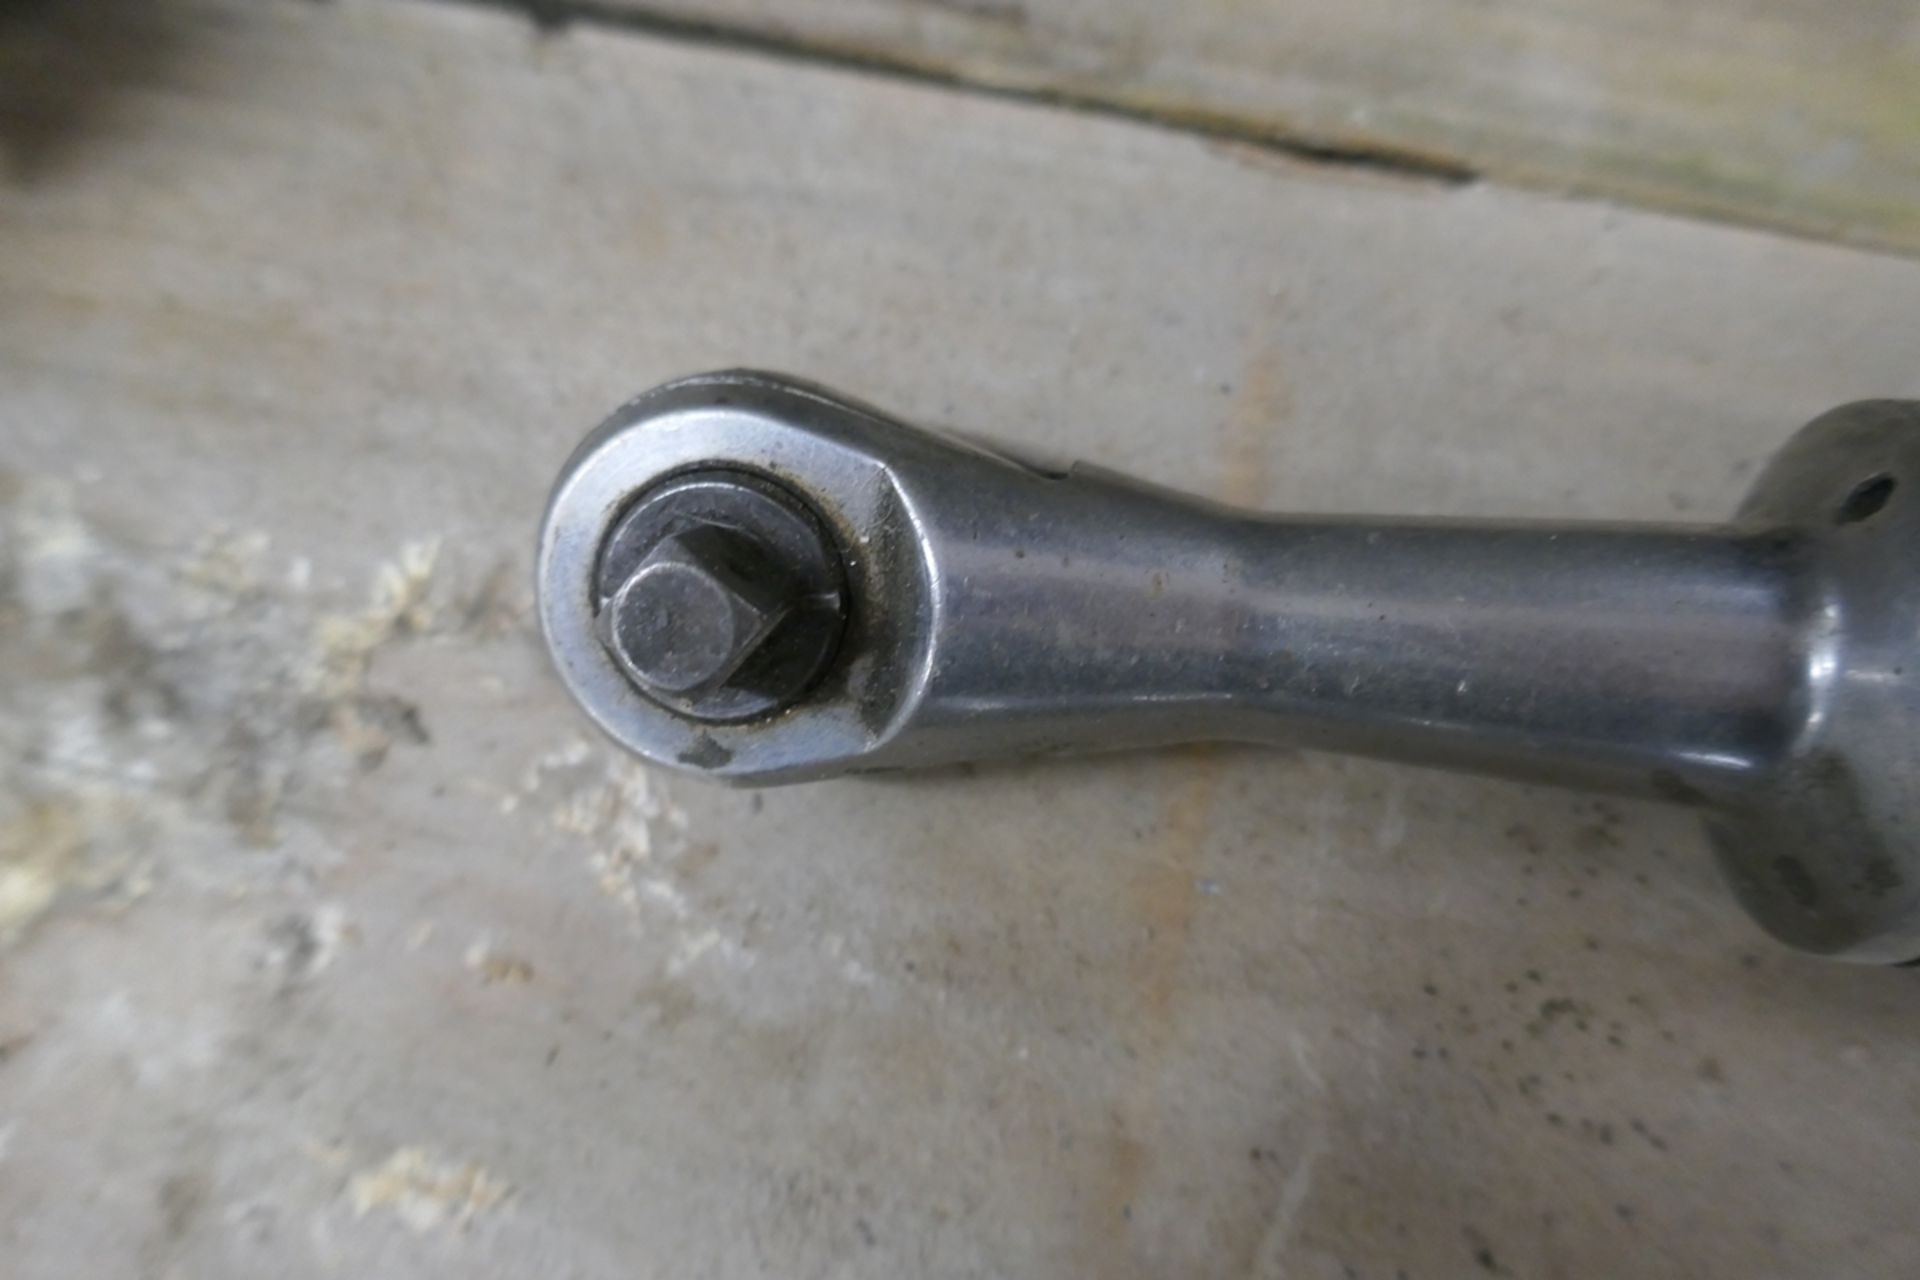 Snap-On air wrench together with a blue-point air wrench - Image 8 of 8